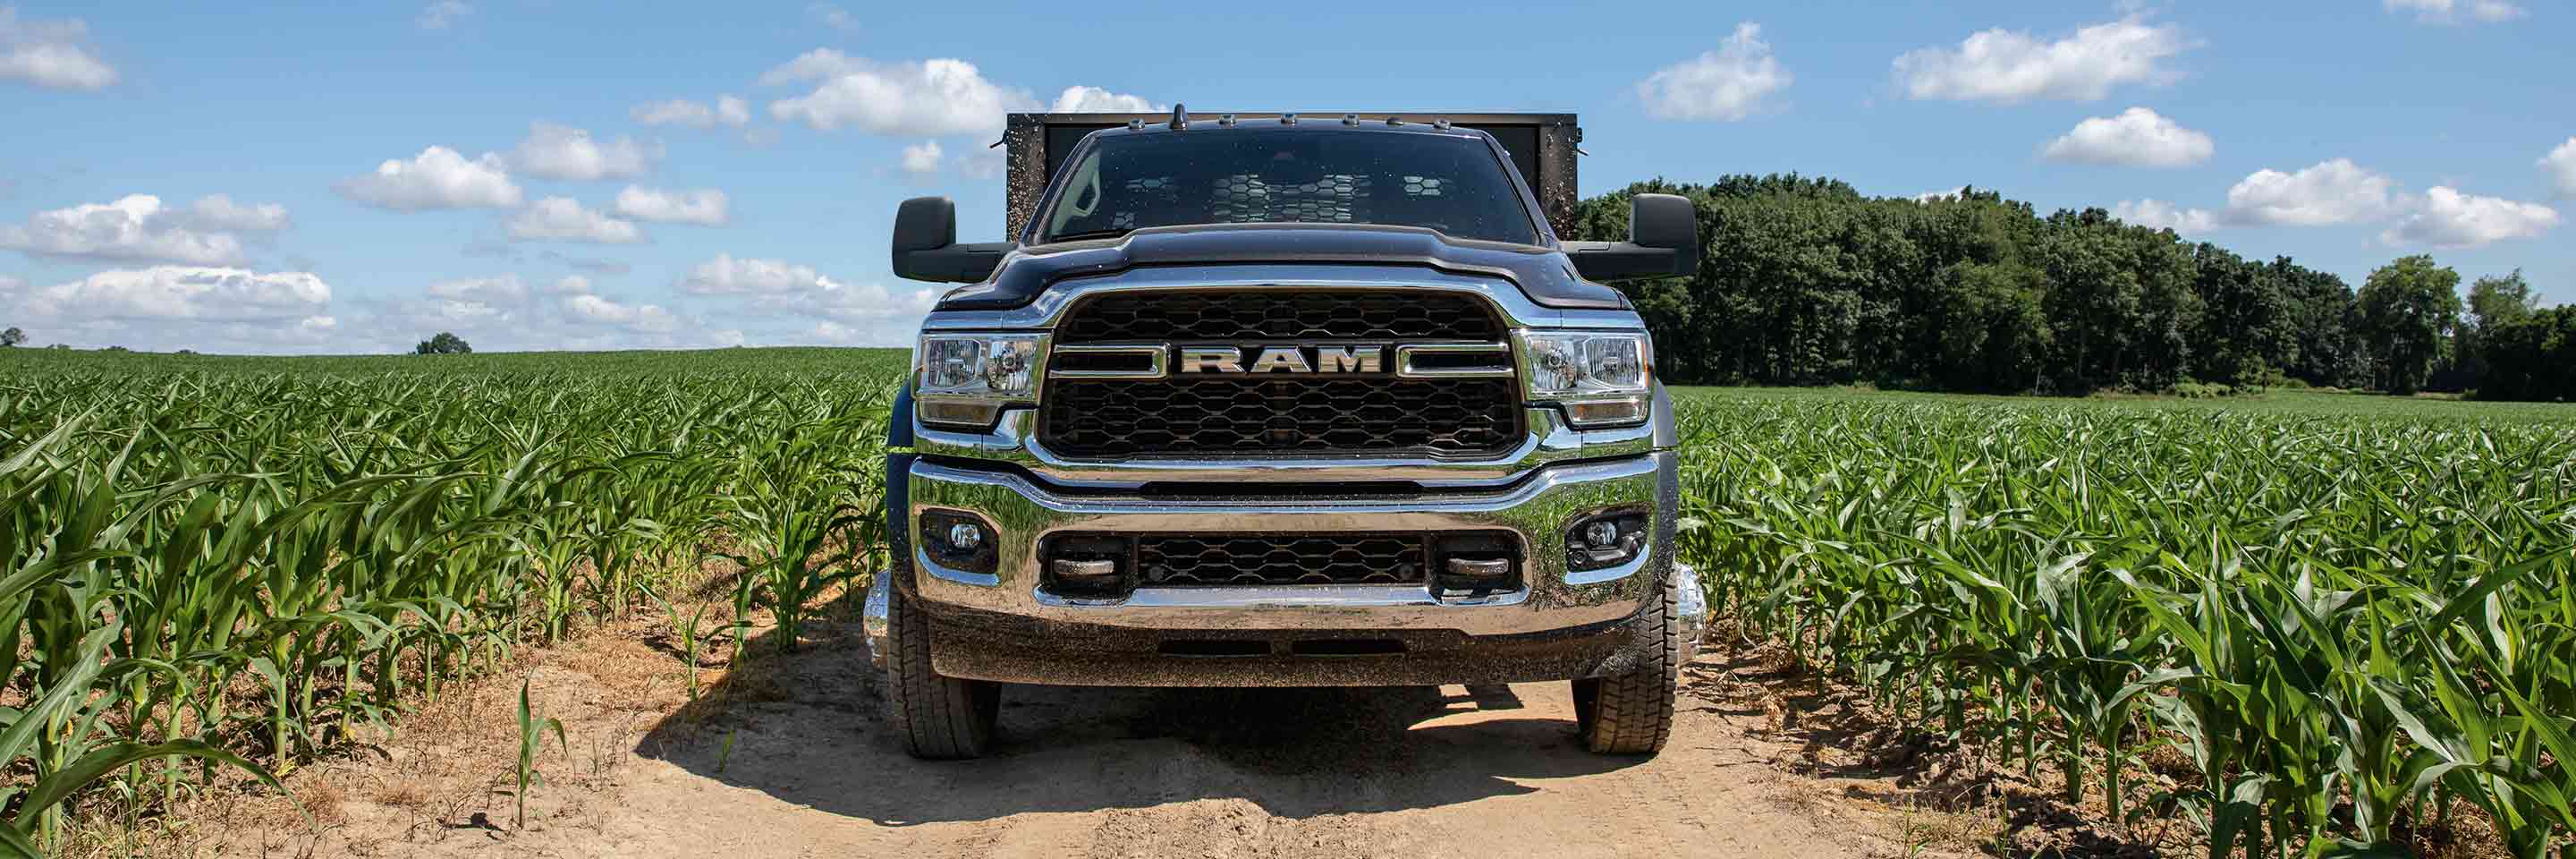 A head-on view of a 2023 Ram Chassis Cab being driven on a dirt road with farm fields on both sides.